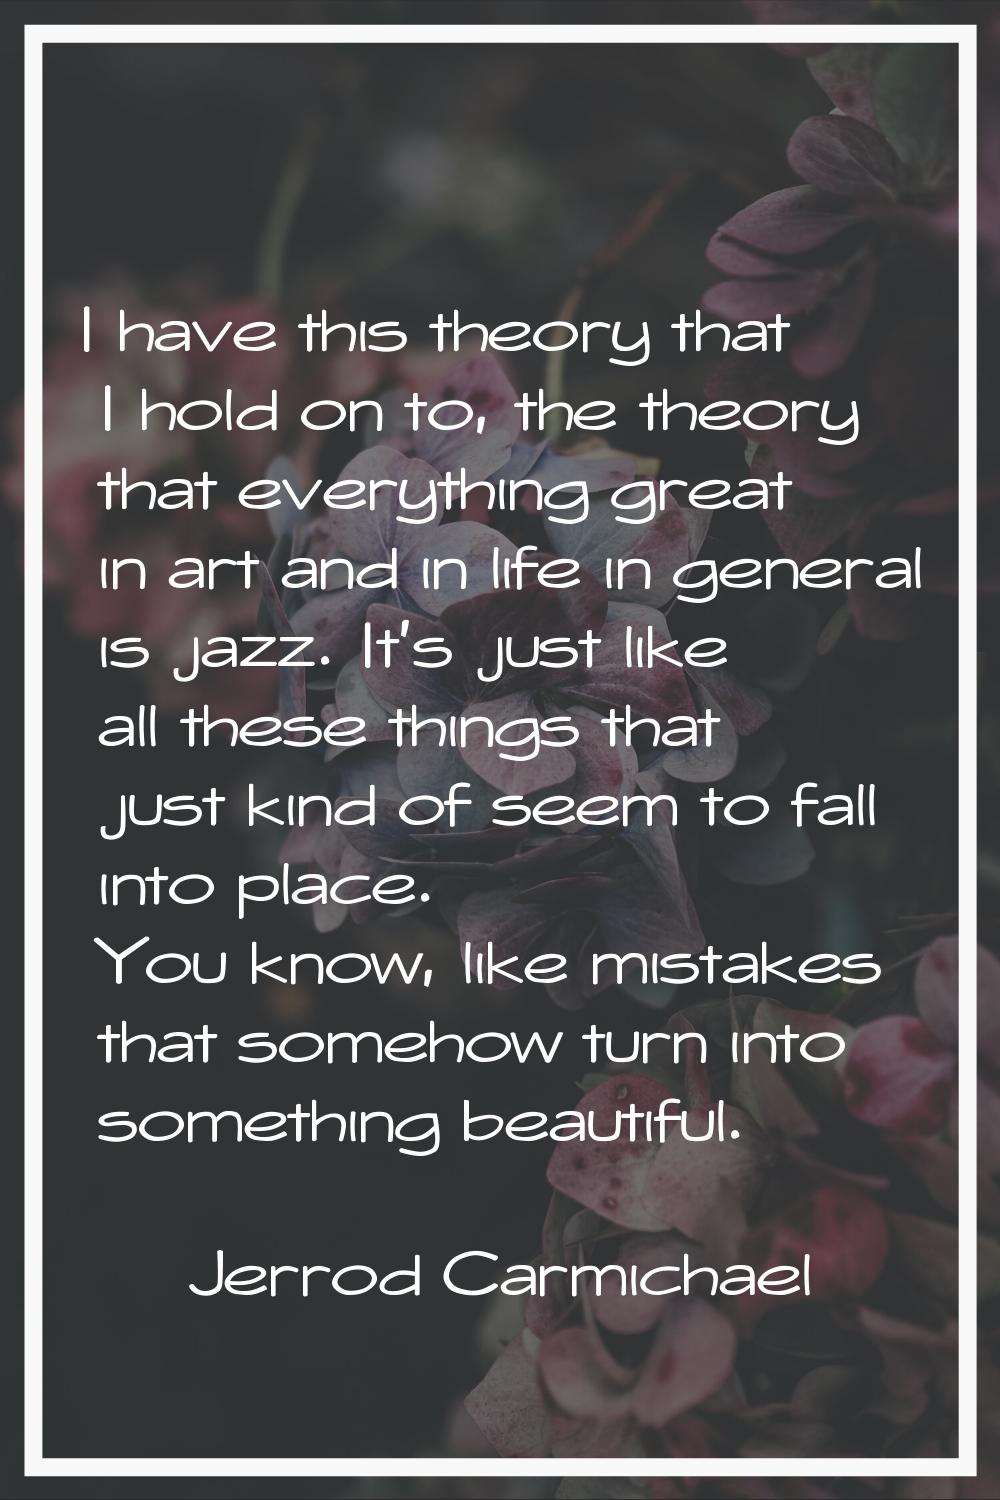 I have this theory that I hold on to, the theory that everything great in art and in life in genera